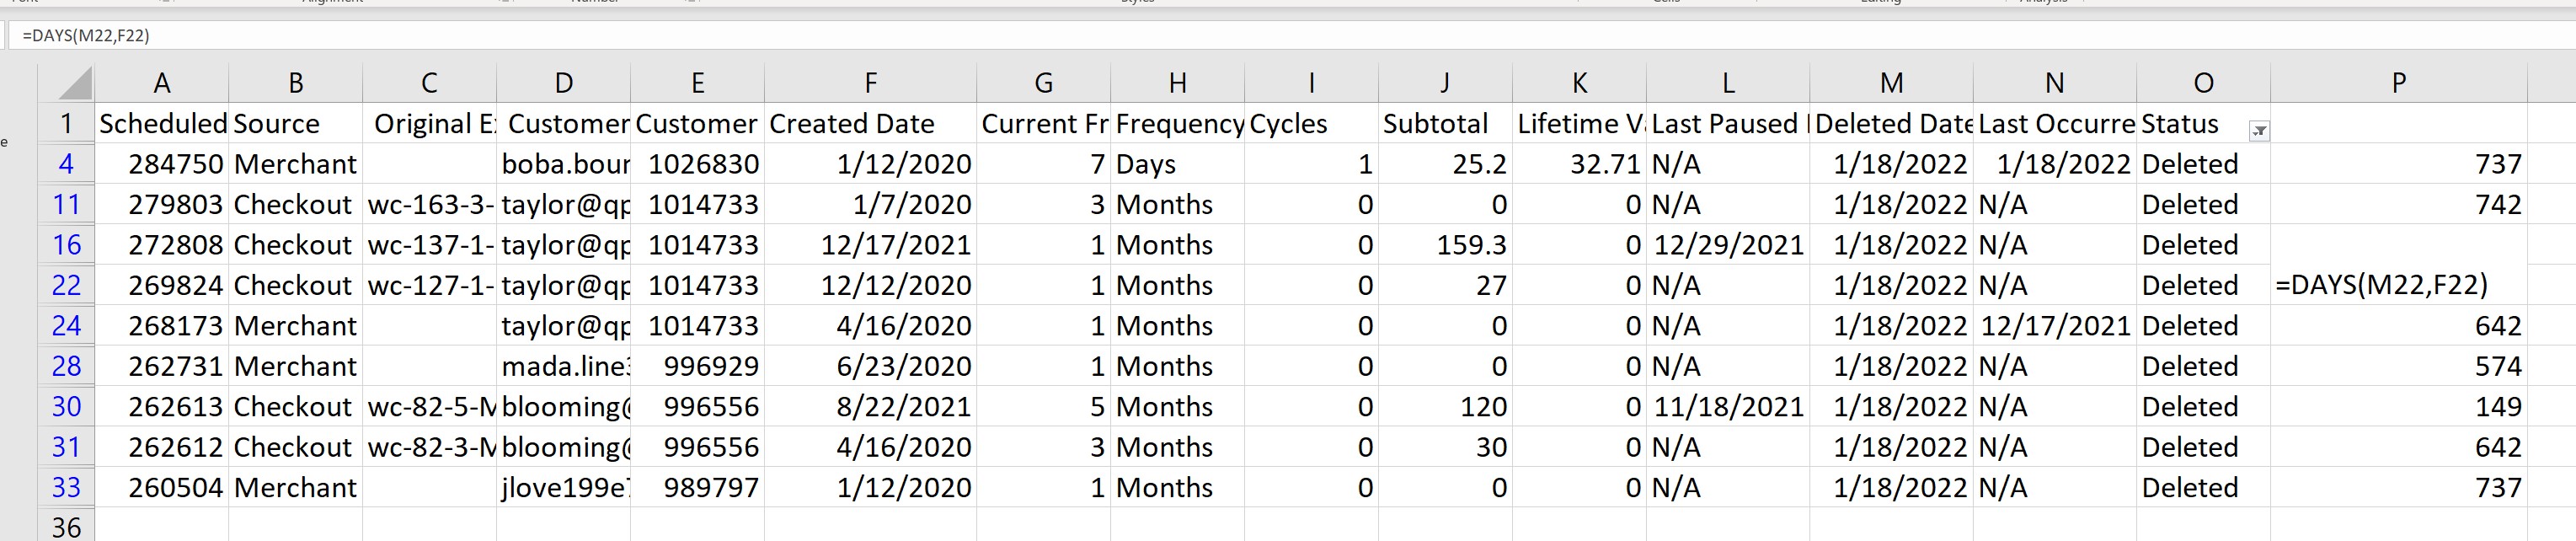 Example of "DAYS" function in Excel